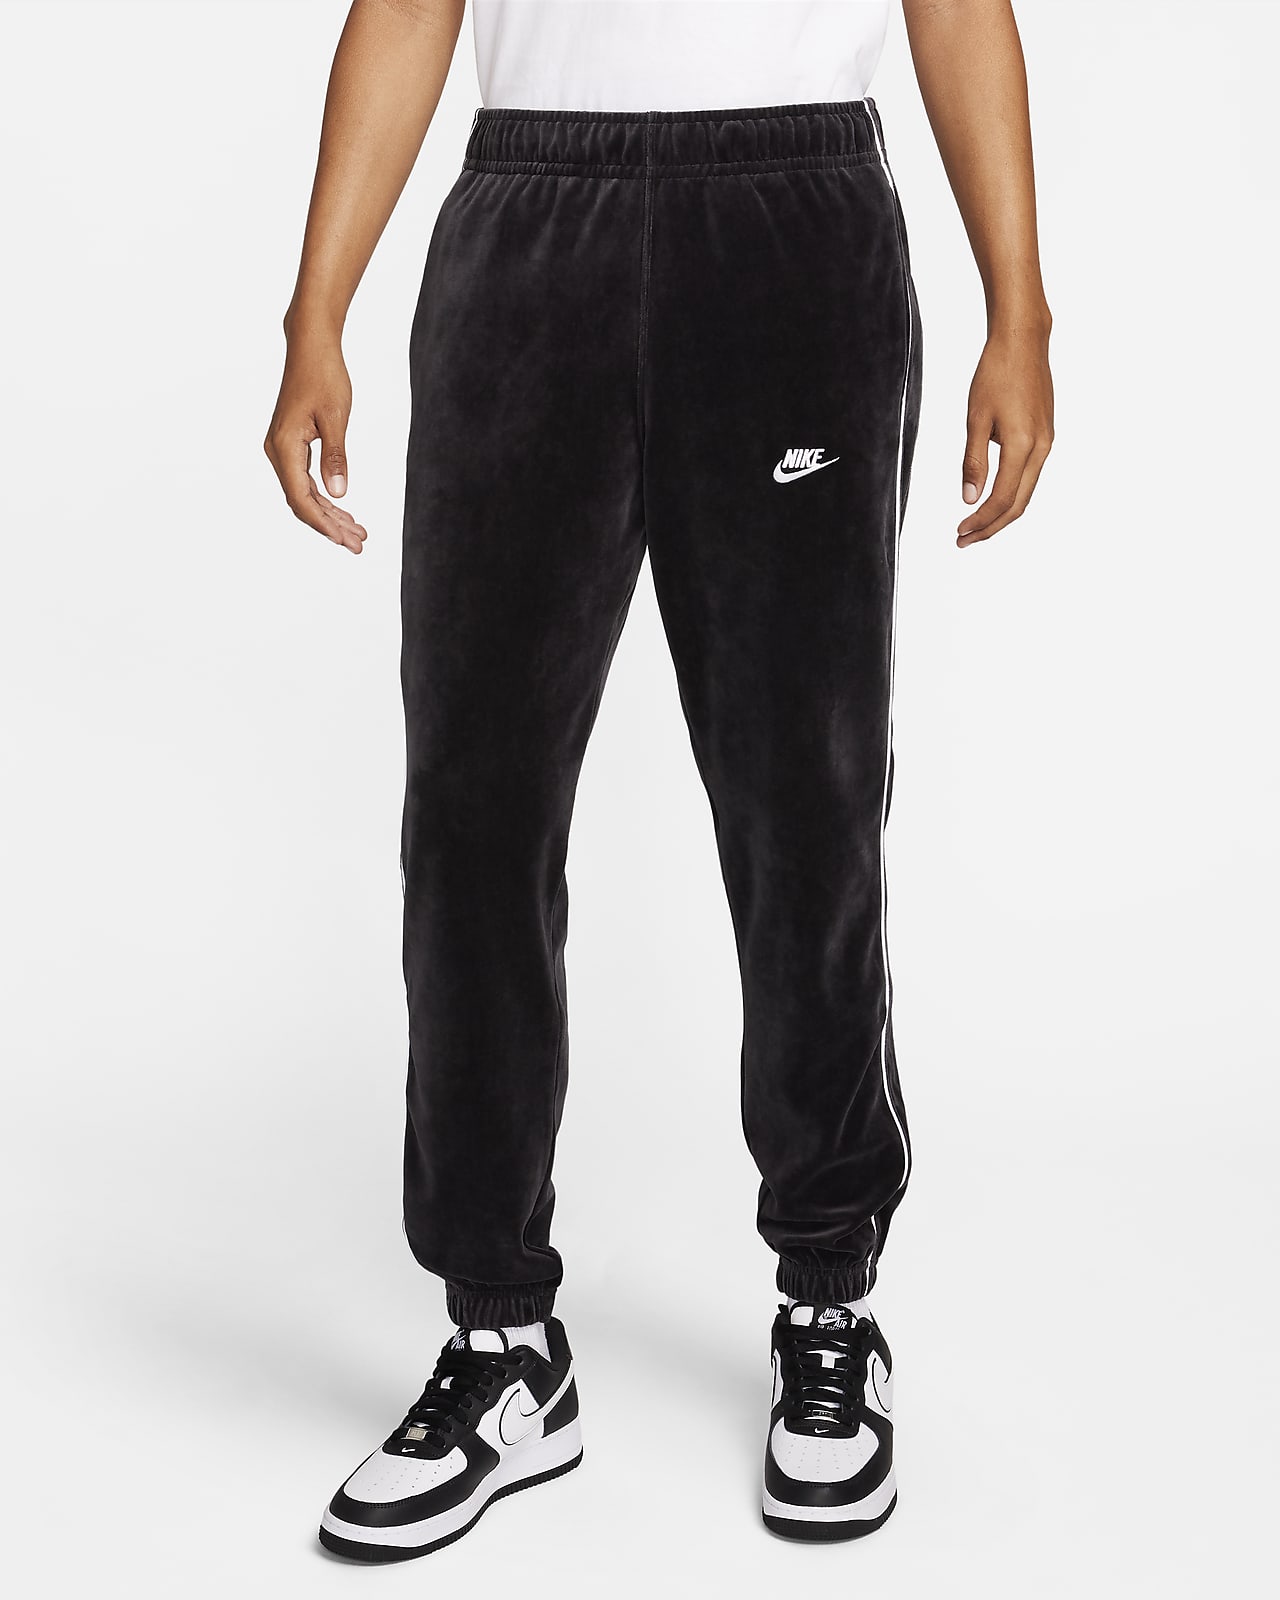 https://static.nike.com/a/images/t_PDP_1280_v1/f_auto,q_auto:eco/7d18a3c2-f674-48a5-a2e8-02a538afe34e/sportswear-club-velour-trousers-6rc32v.png